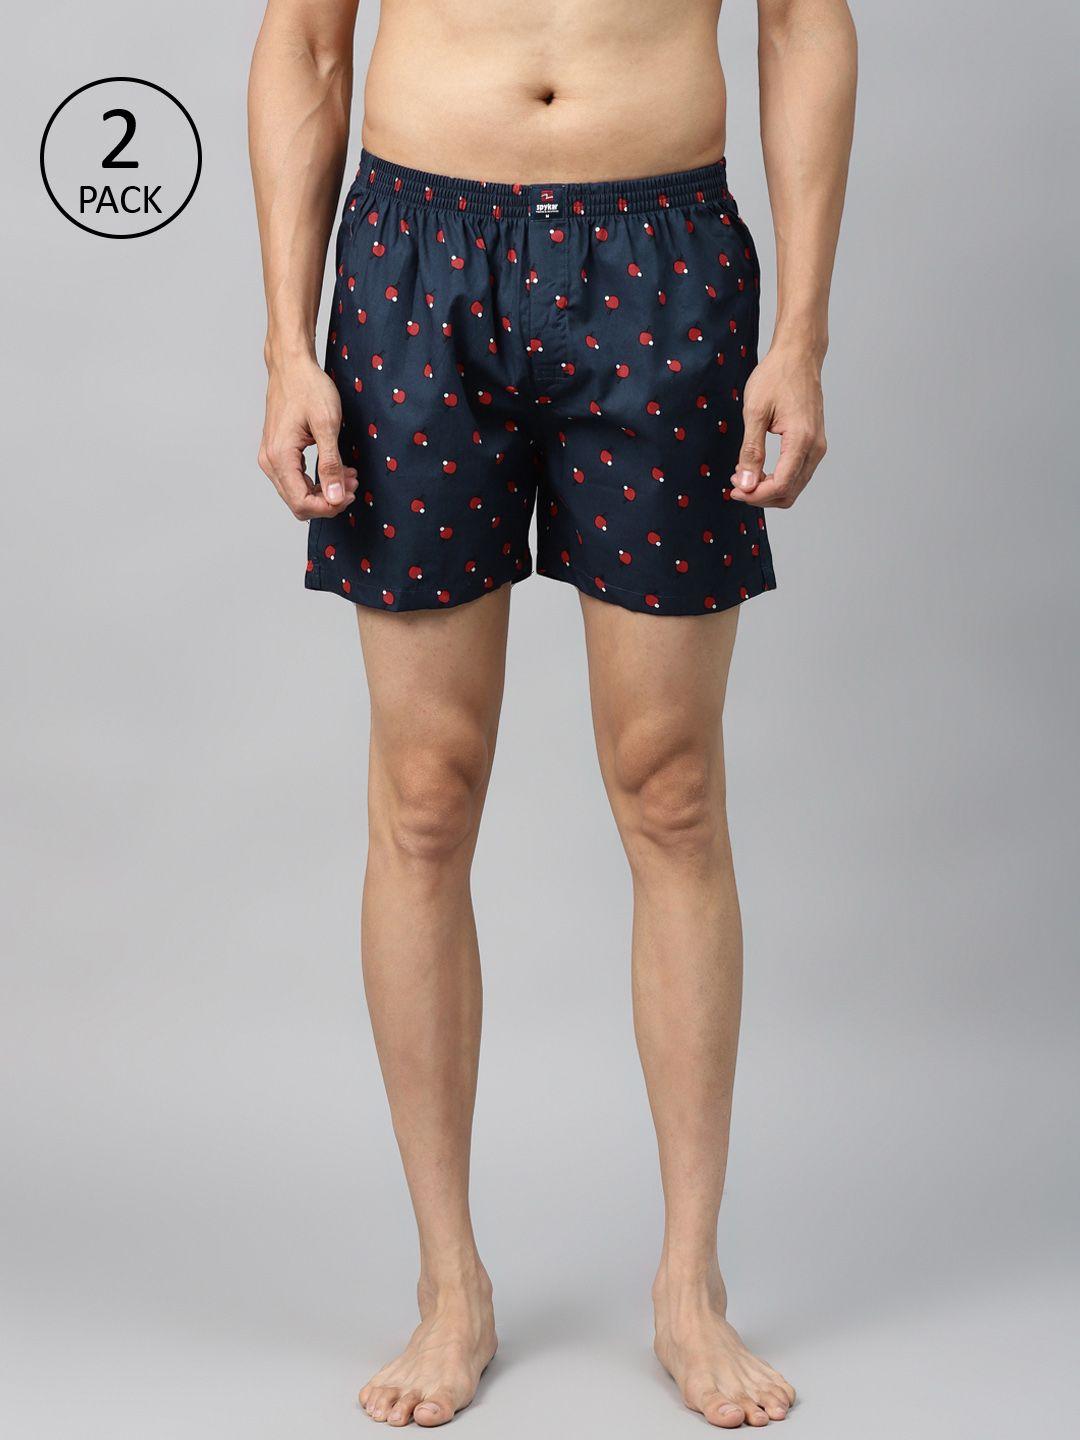 underjeans-by-spykar-men-assorted-printed-boxer